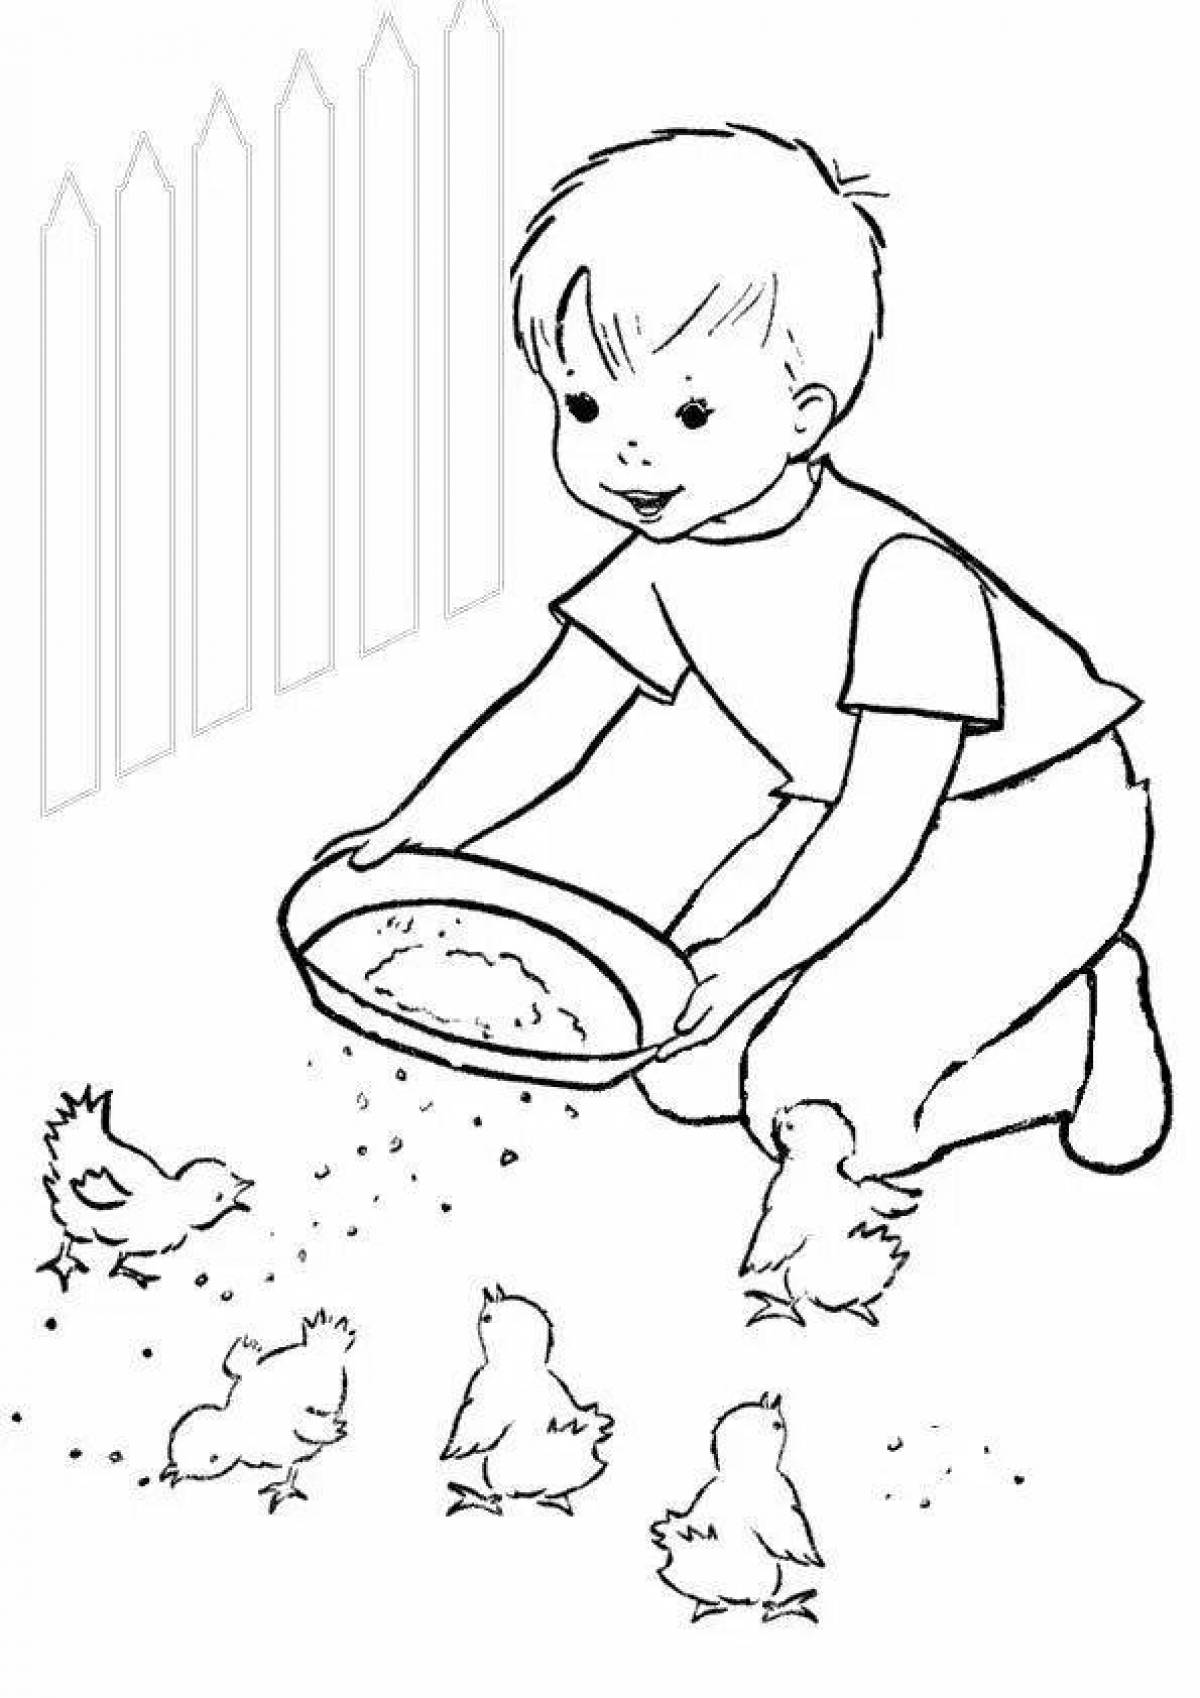 Coloring page good deeds